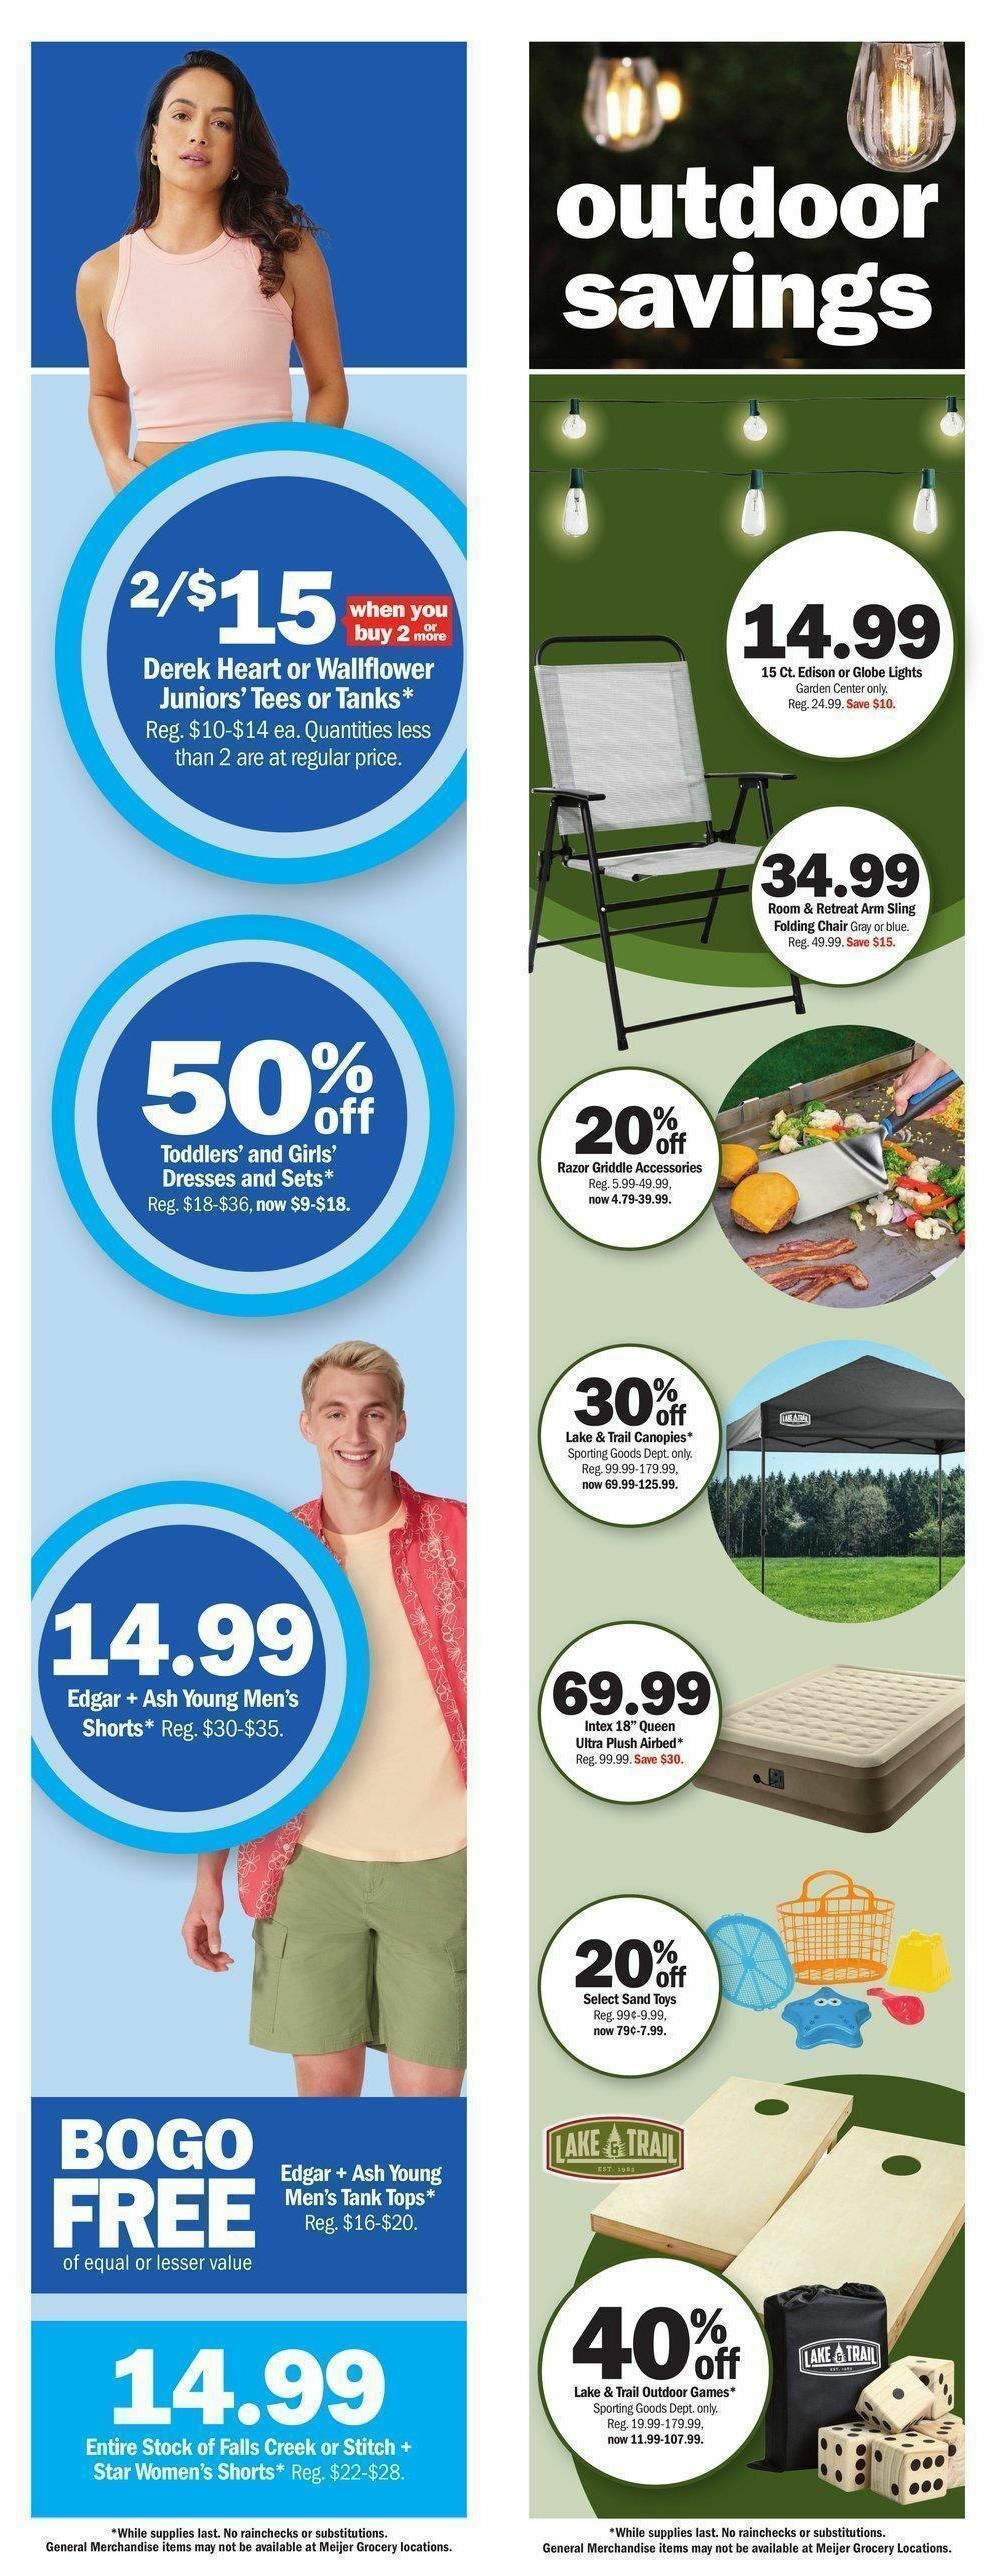 Meijer Weekly Ad from June 25